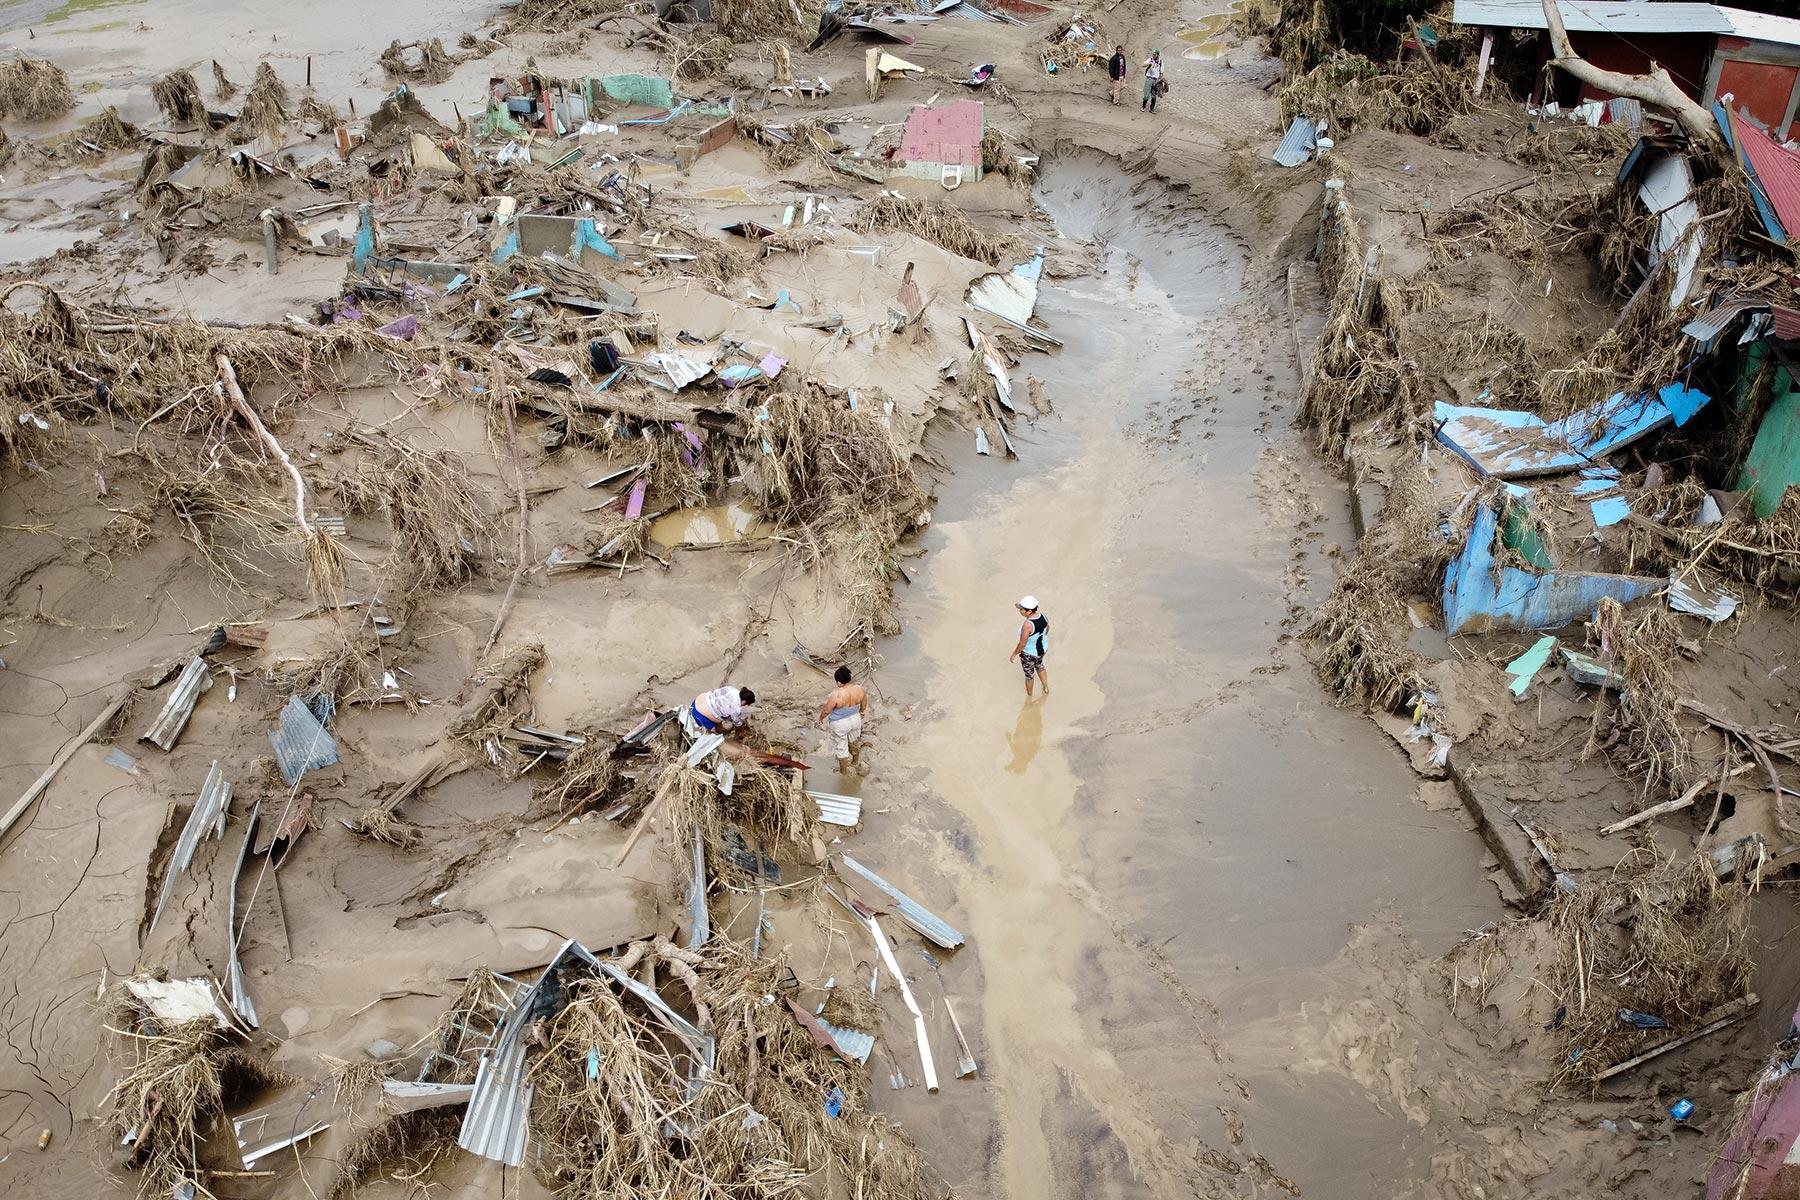 In Honduras, ChamelecÃ³n, San Pedro Sula, the hurricanes Eta and Iota recently caused destruction to housing and infrastructure which will take years to recover - one example for the disastrous effects of climate change on vulnerable communities. Photo: Sean Hawkey / Life on Earth 